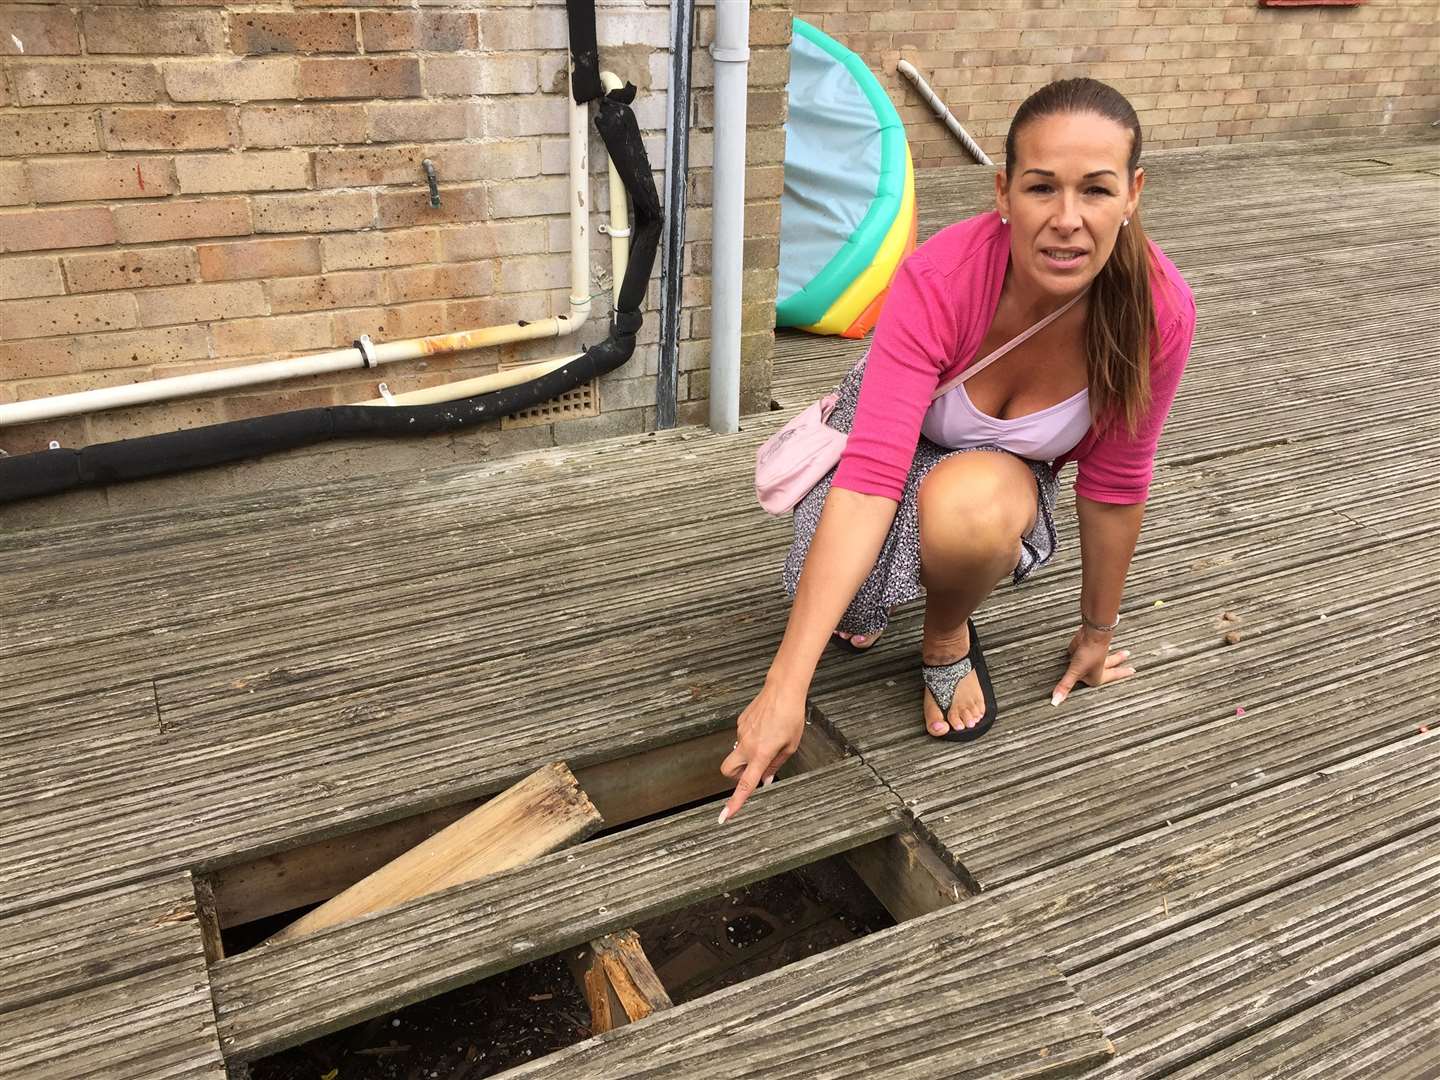 Victoria Brown, 49, wants the decking to be ripped up at St Andrew's Close in Whitstable